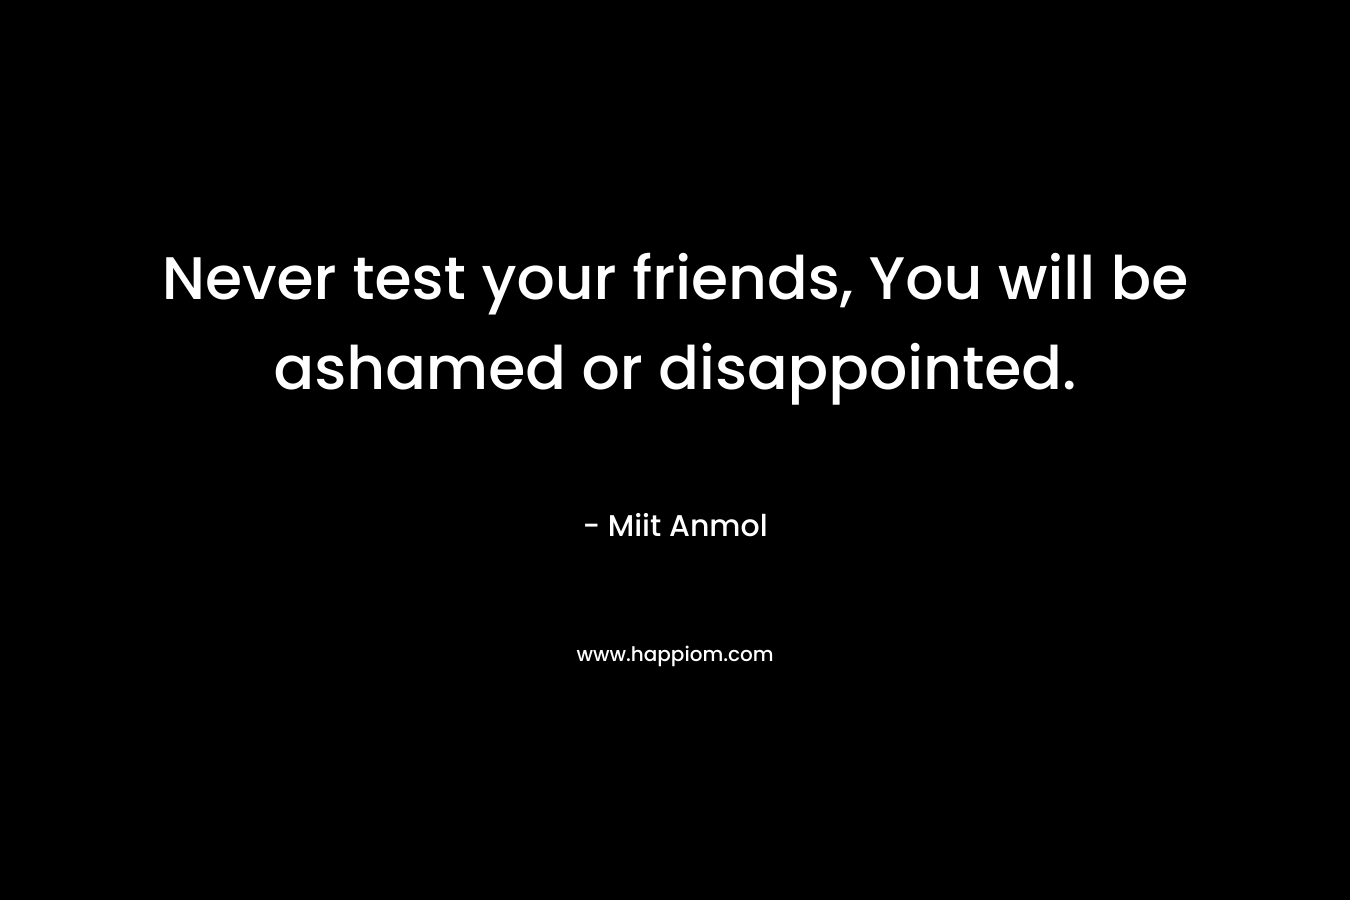 Never test your friends, You will be ashamed or disappointed. – Miit Anmol